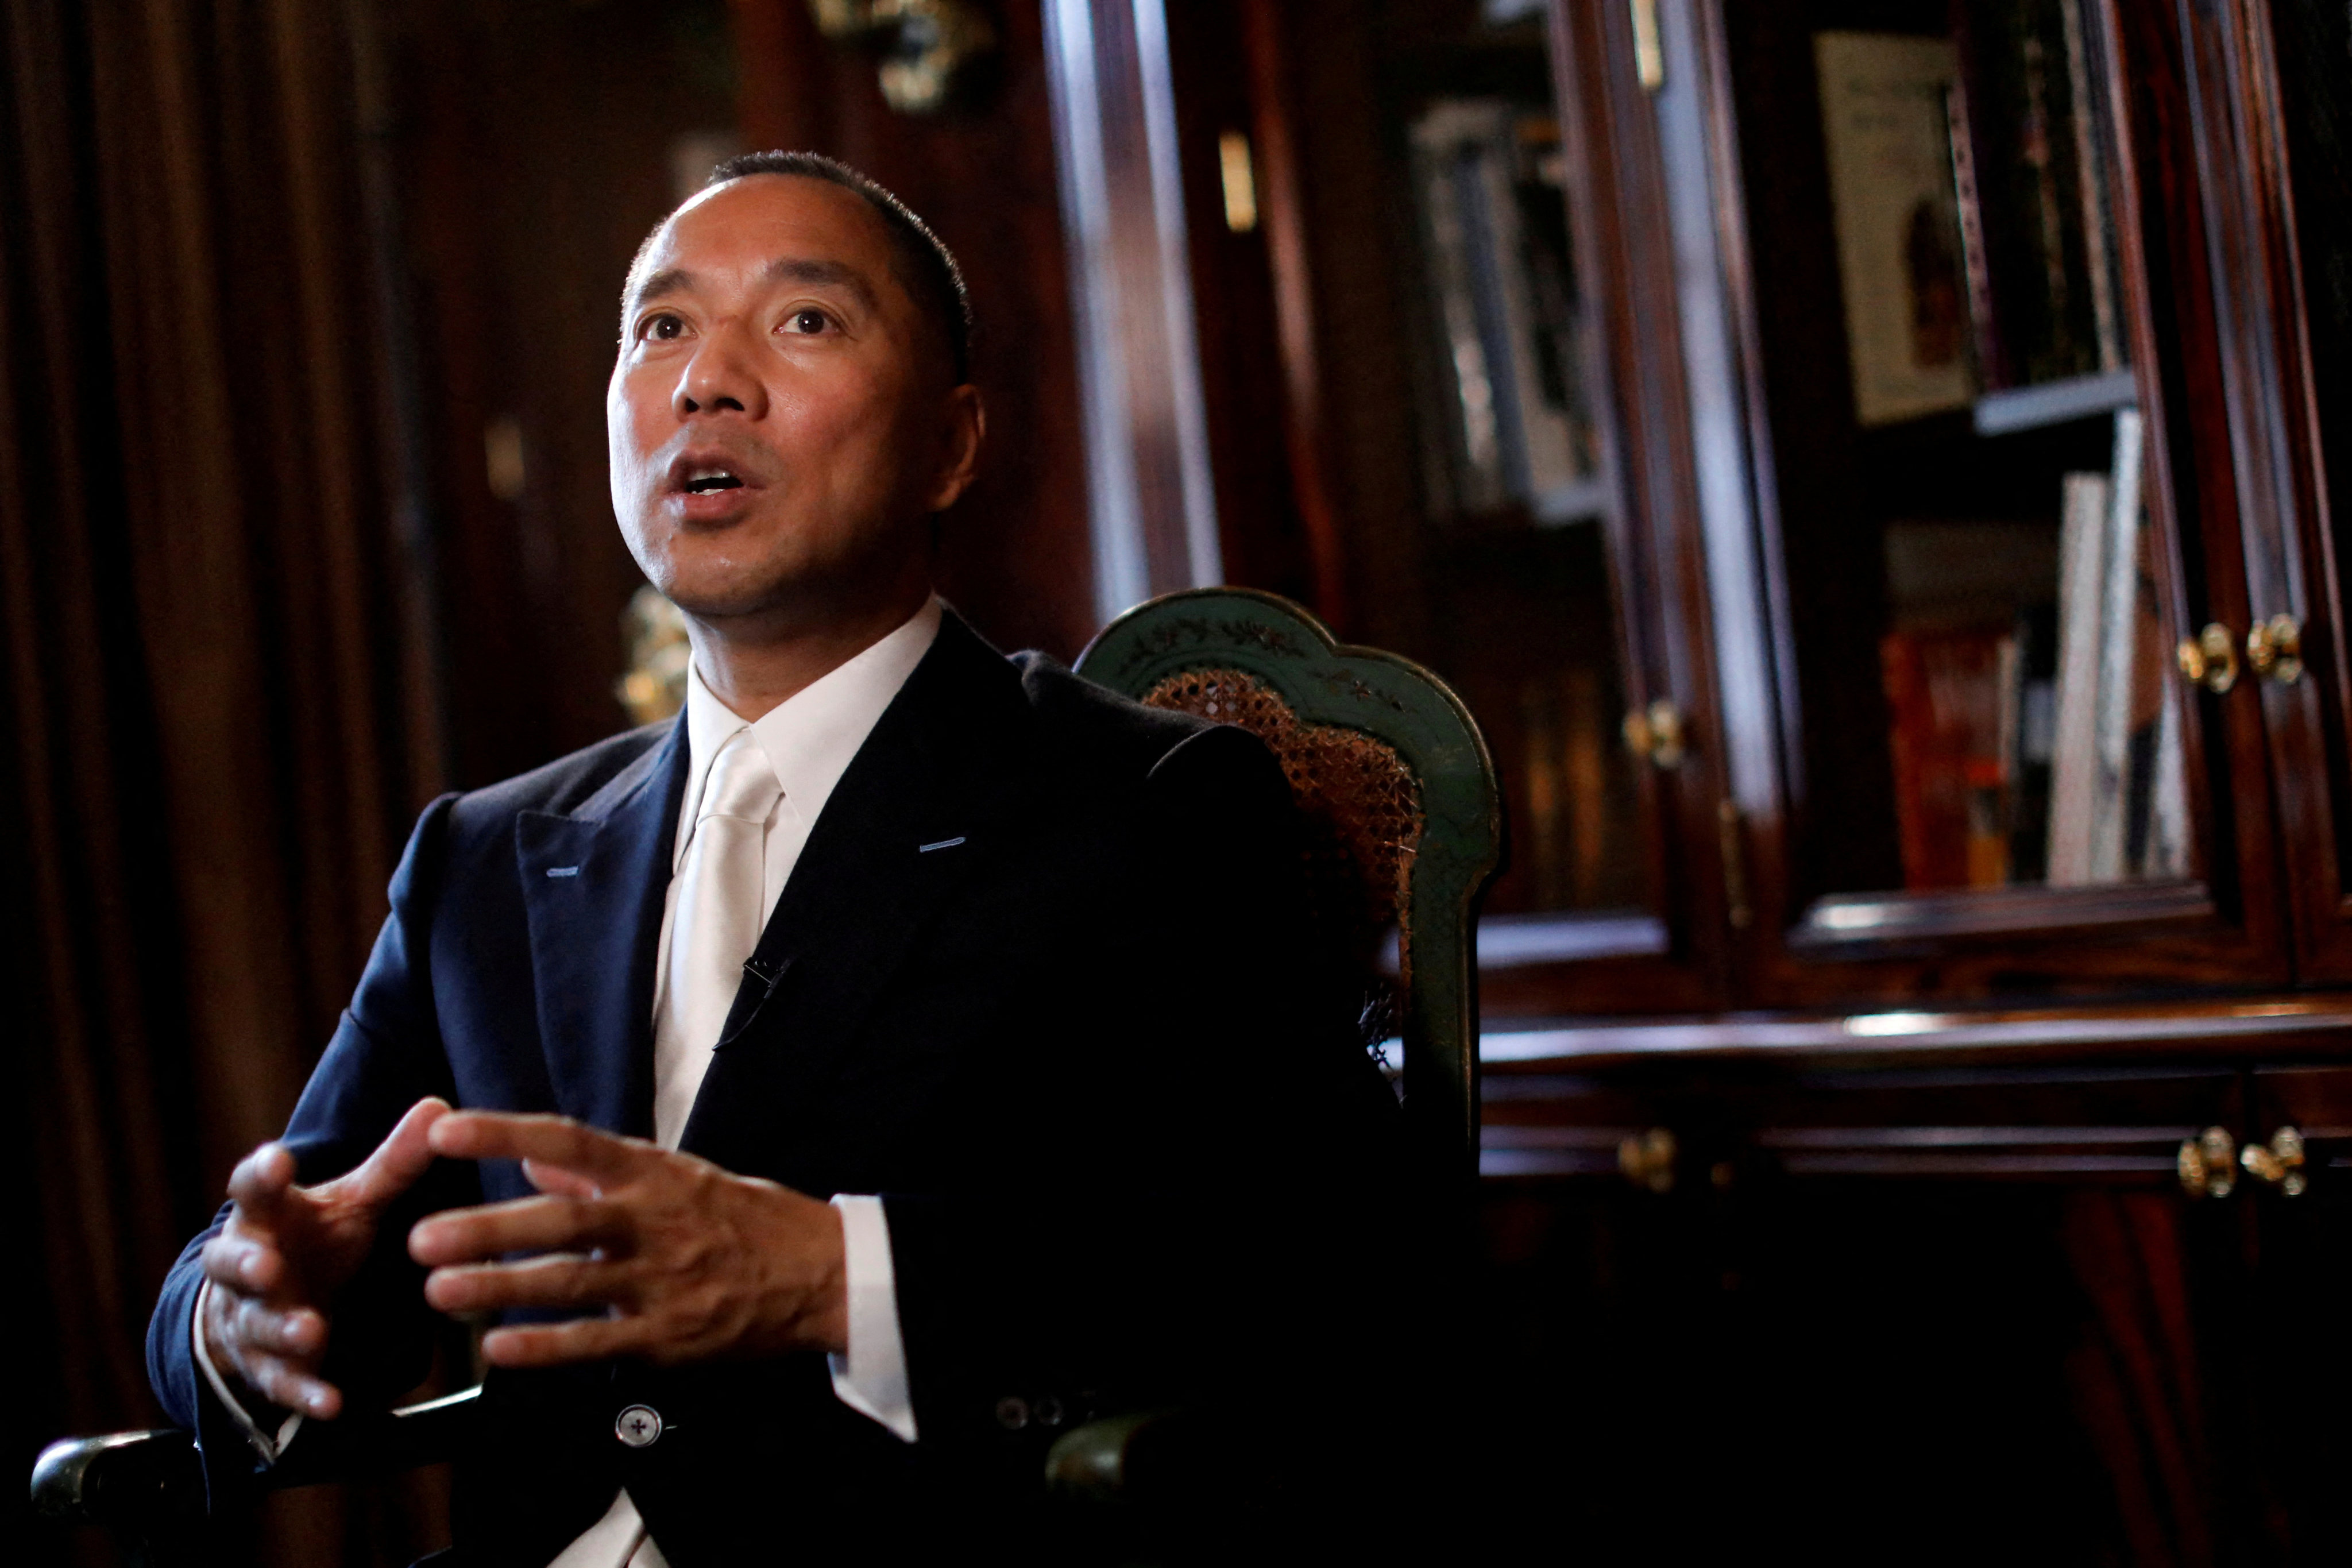 Businessman Guo Wengui speaks during an interview in New York in April 2017. Photo: Reuters